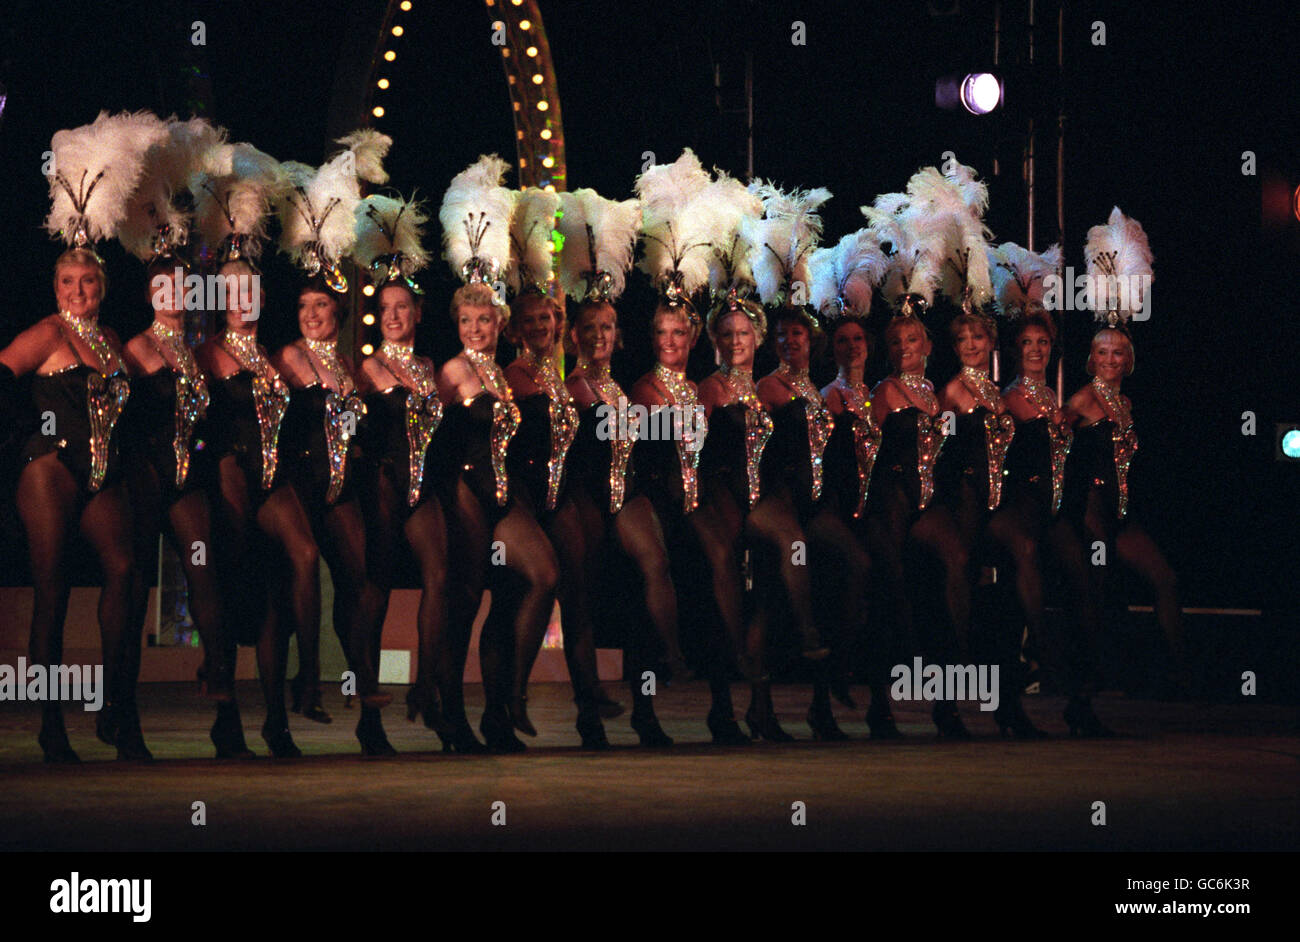 THE SIXTIES TILLER GIRLS PERFORM IN FRONT OF THE QUEEN AND OTHER MEMBERS OF THE ROYAL FAMILY AT LONDON'S EARLS COURT TONIGHT (MONDAY) DURING THE GREAT EVENT, A CELEBRATION OF THE 40TH ANNIVERSARY OF THE QUEEN'S ACCESSION TO THE THRONE. Stock Photo